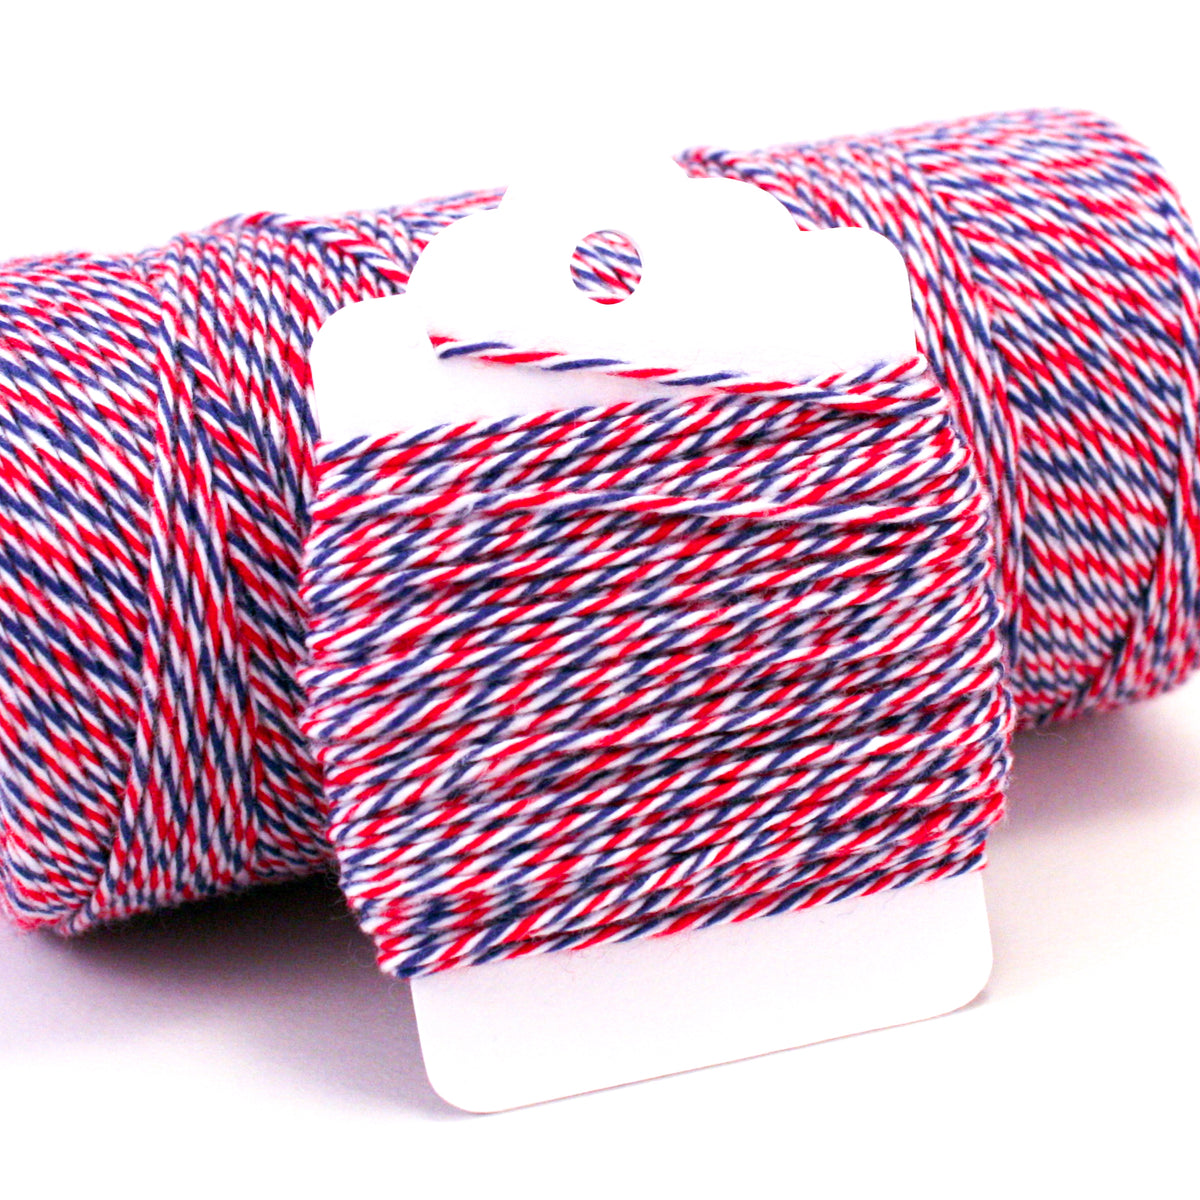 Airmail Striped Baker's Twine - 4-ply thin cotton twine